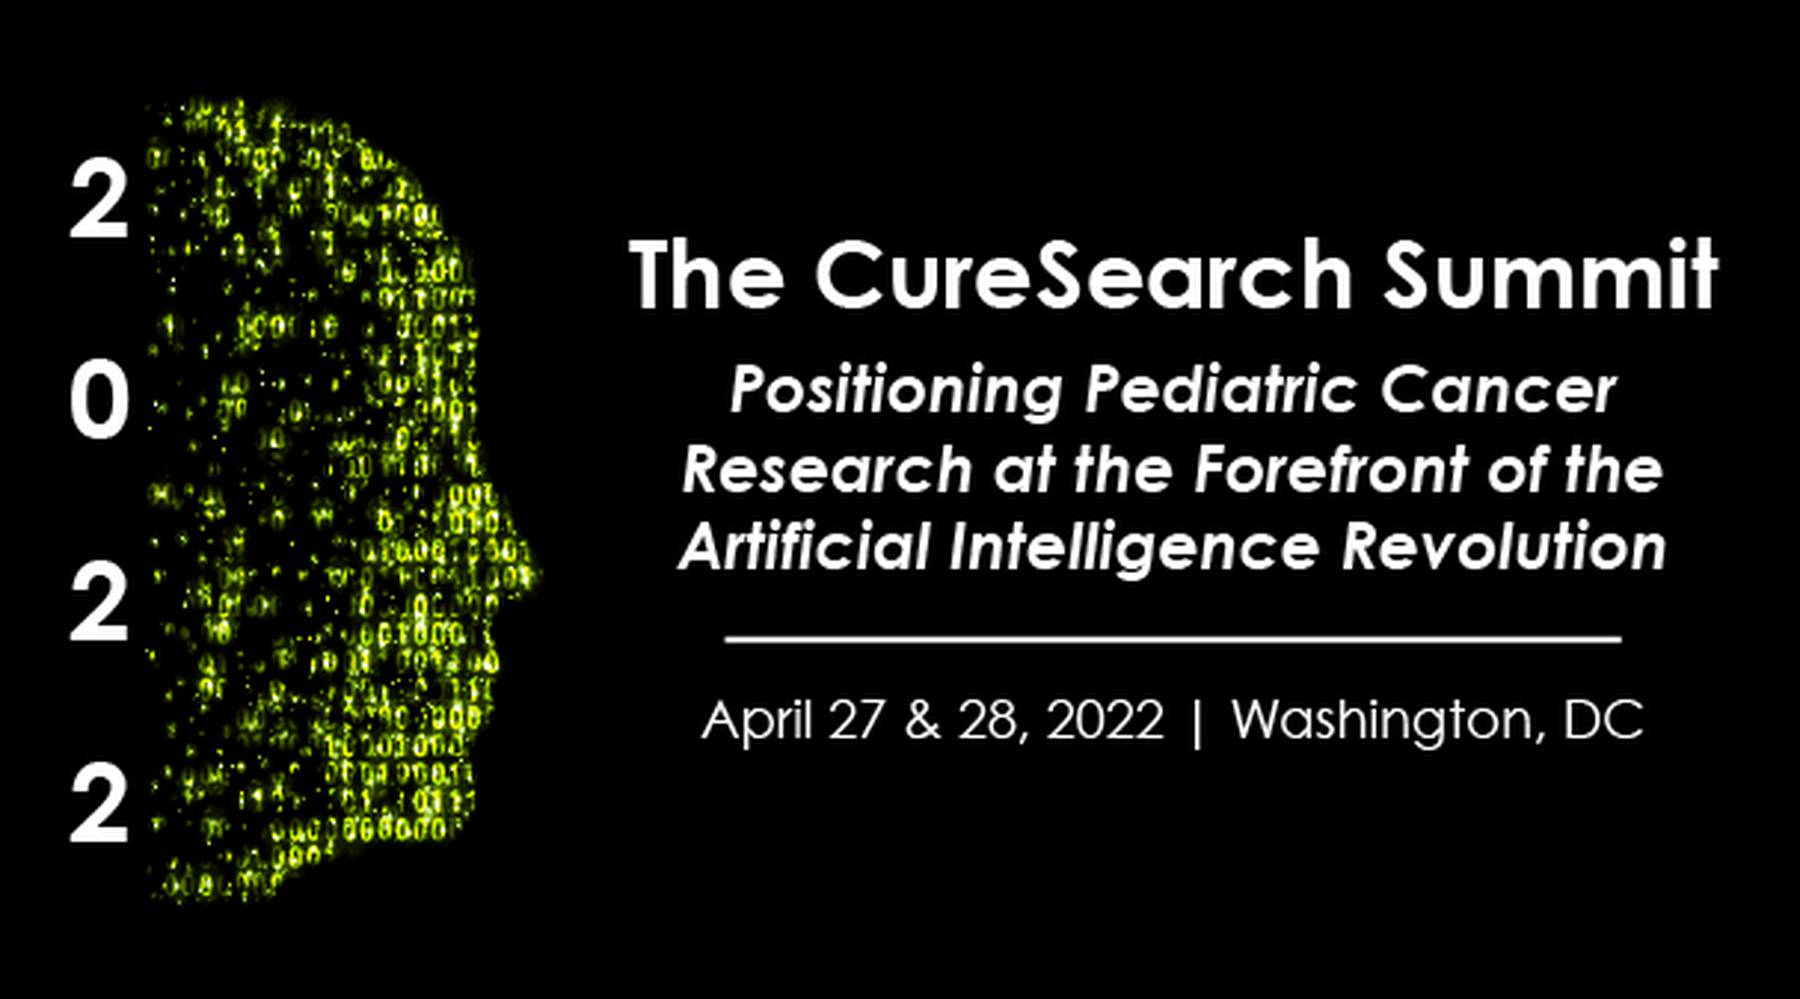 CureSearch Summit 2022